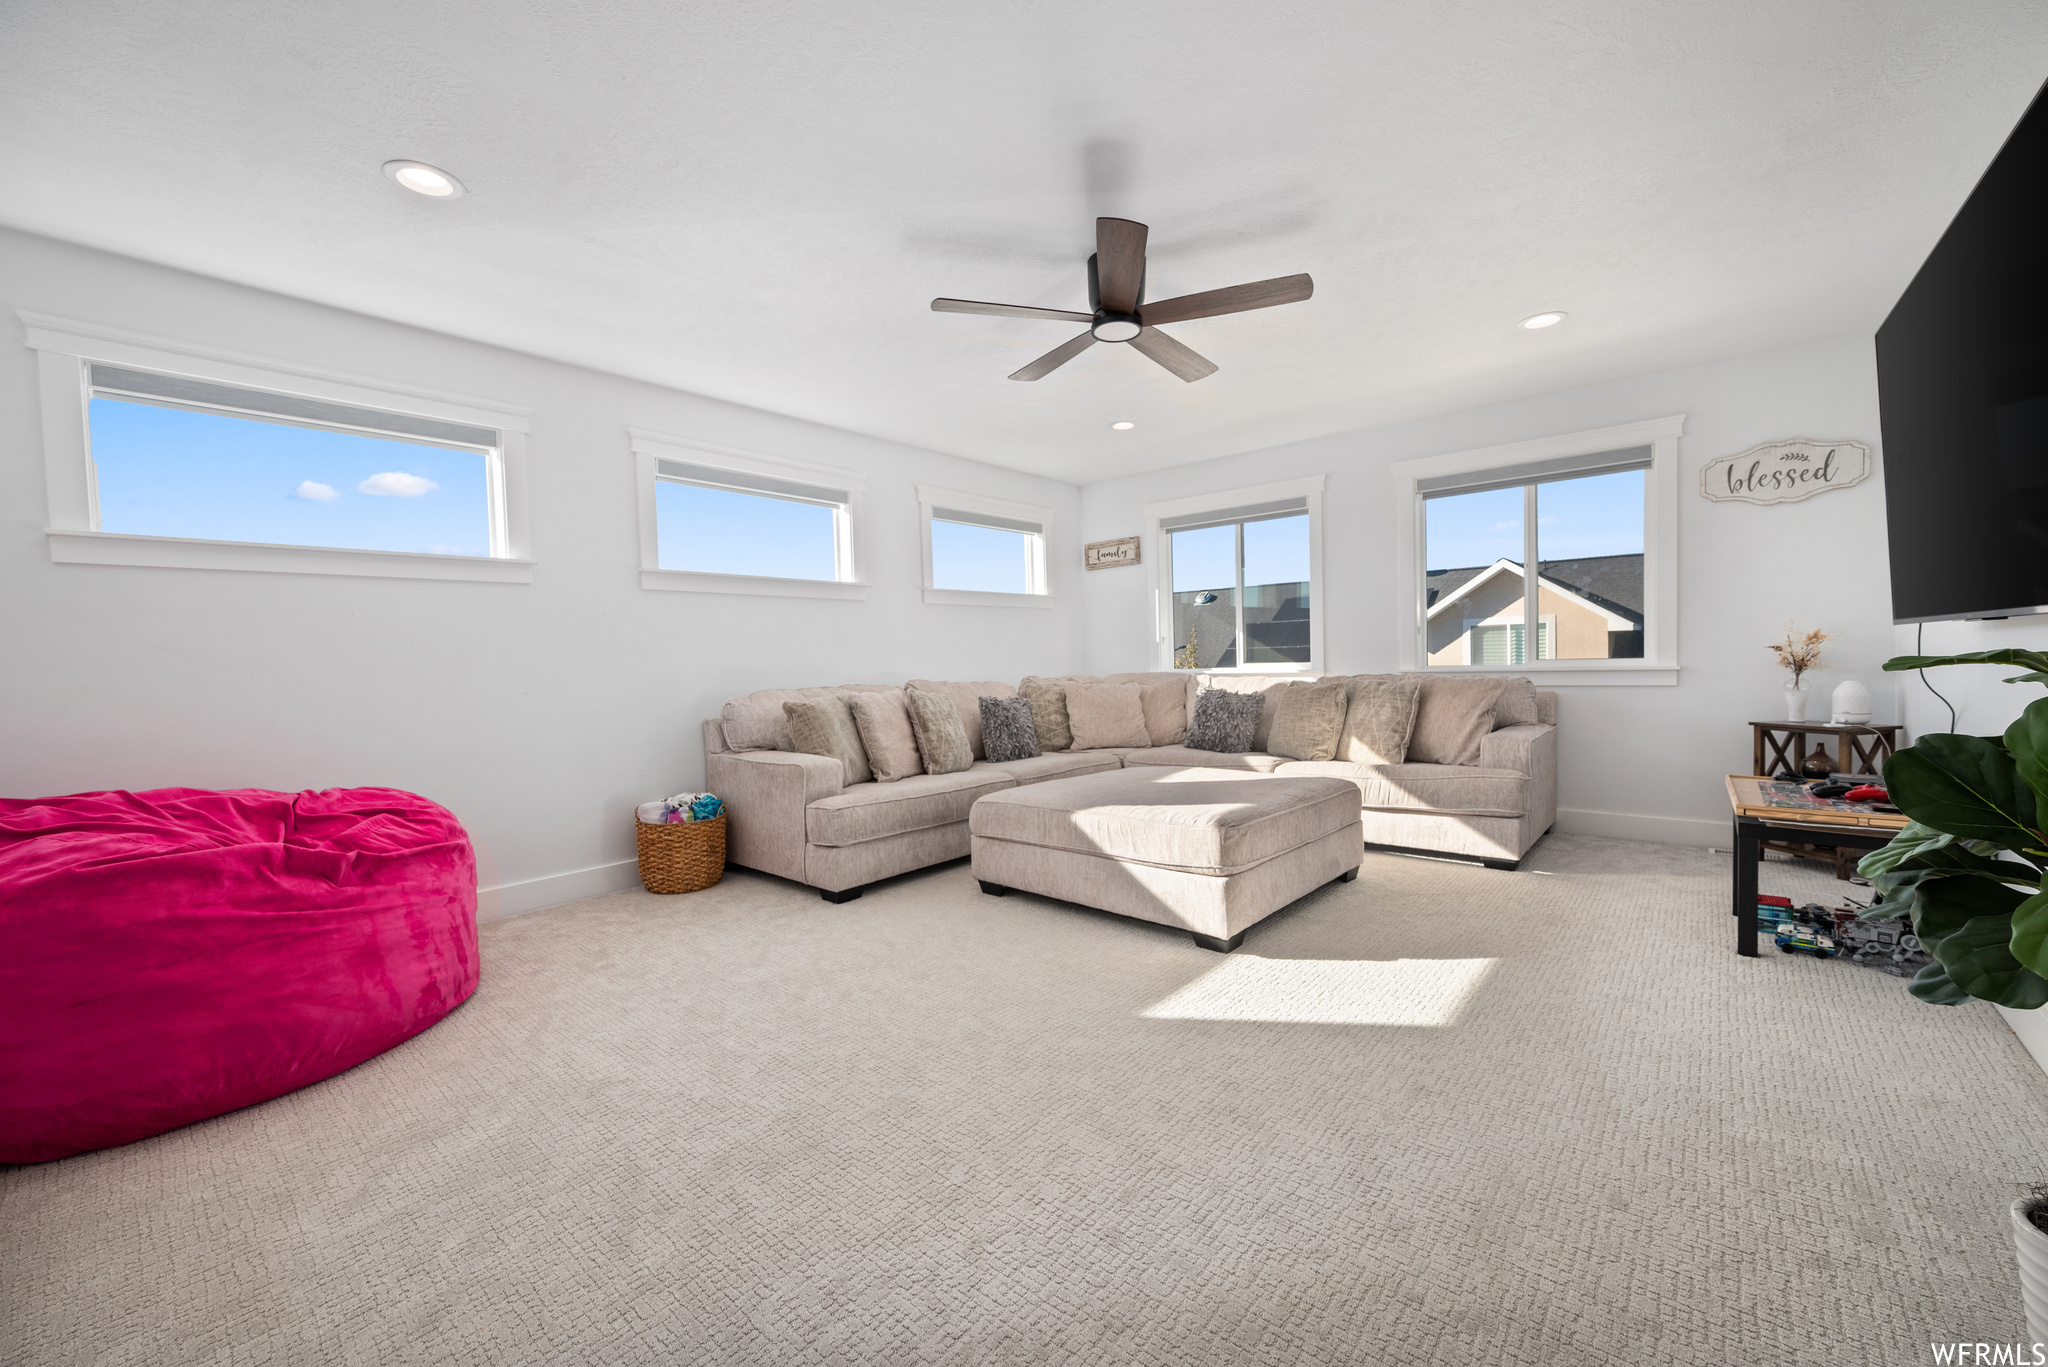 Carpeted second-floor living room with ceiling fan and abundant window light.